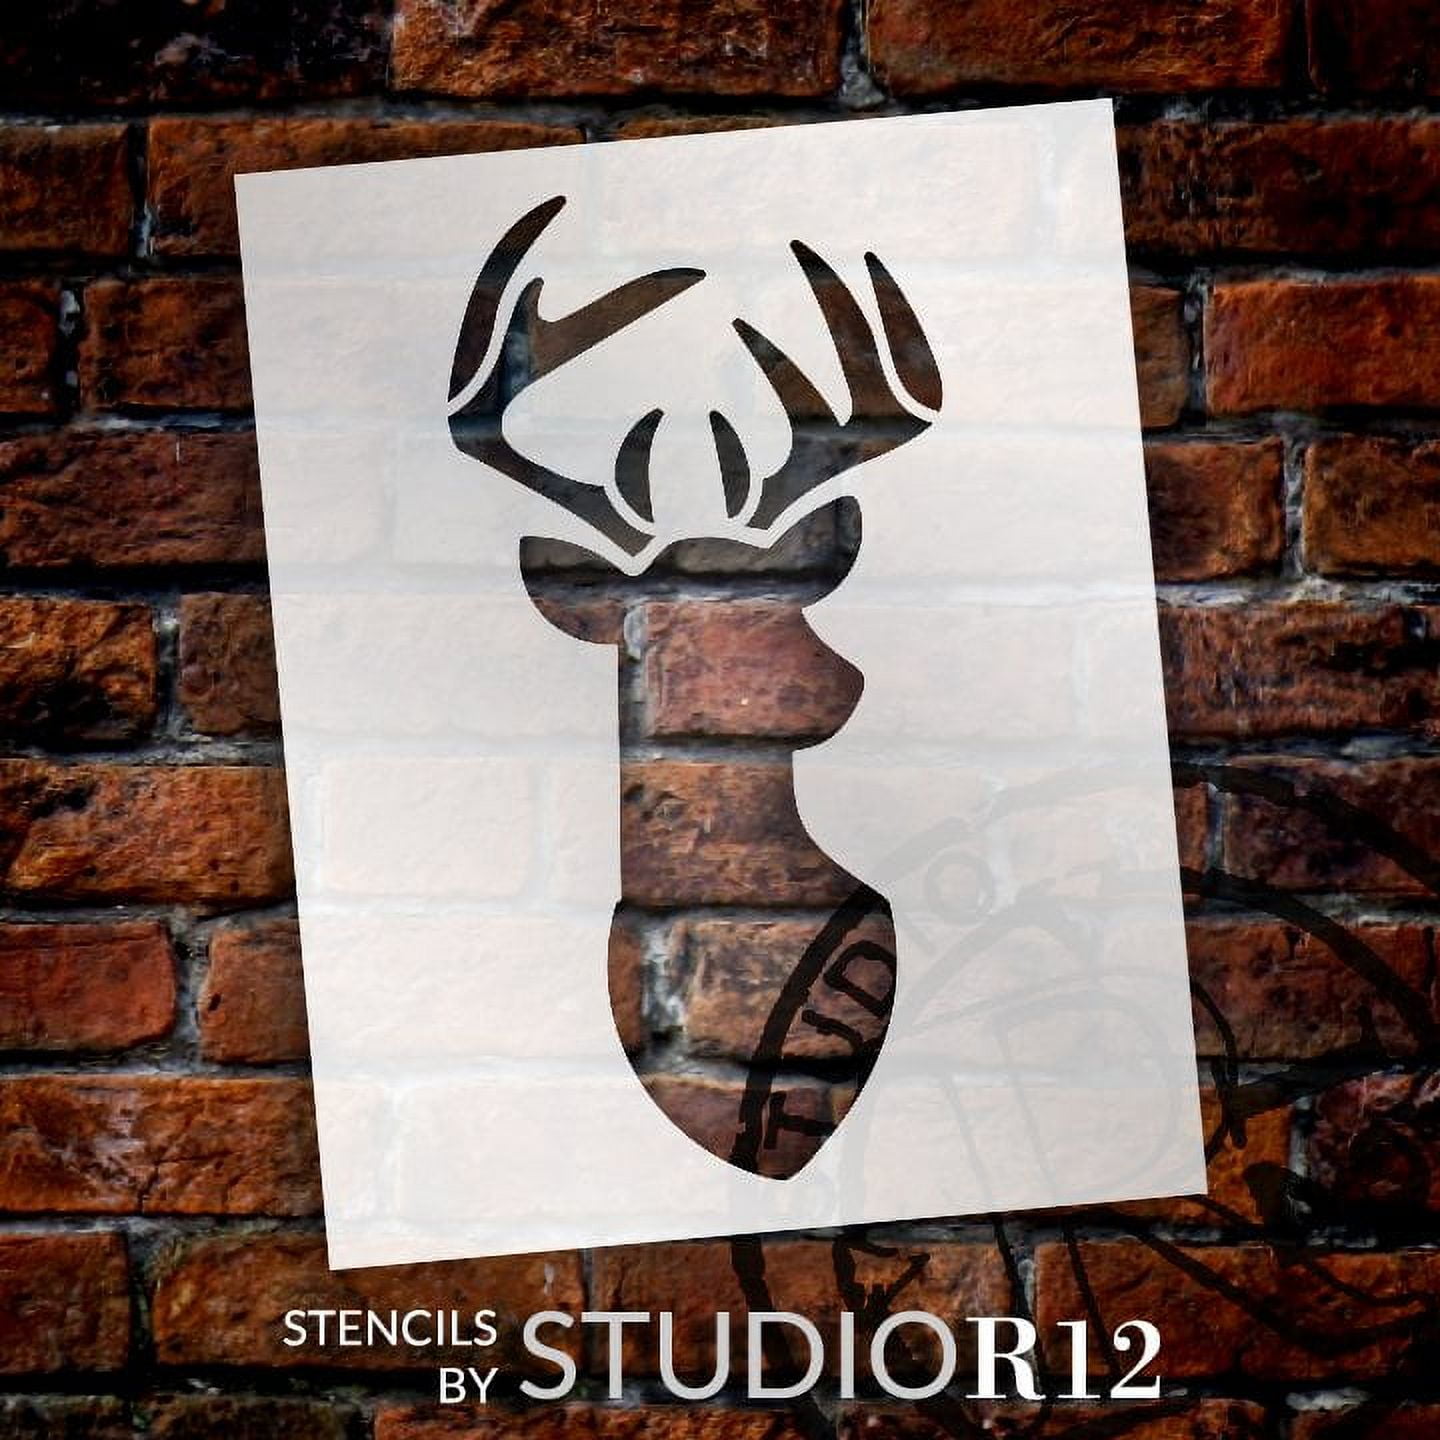 Stencils for Painting on Wood,Wall,Home Decor,29x21cm A4 Mother Son Deer  DIY Reusable Stencils Art Templates for Painting on Wood,Wall